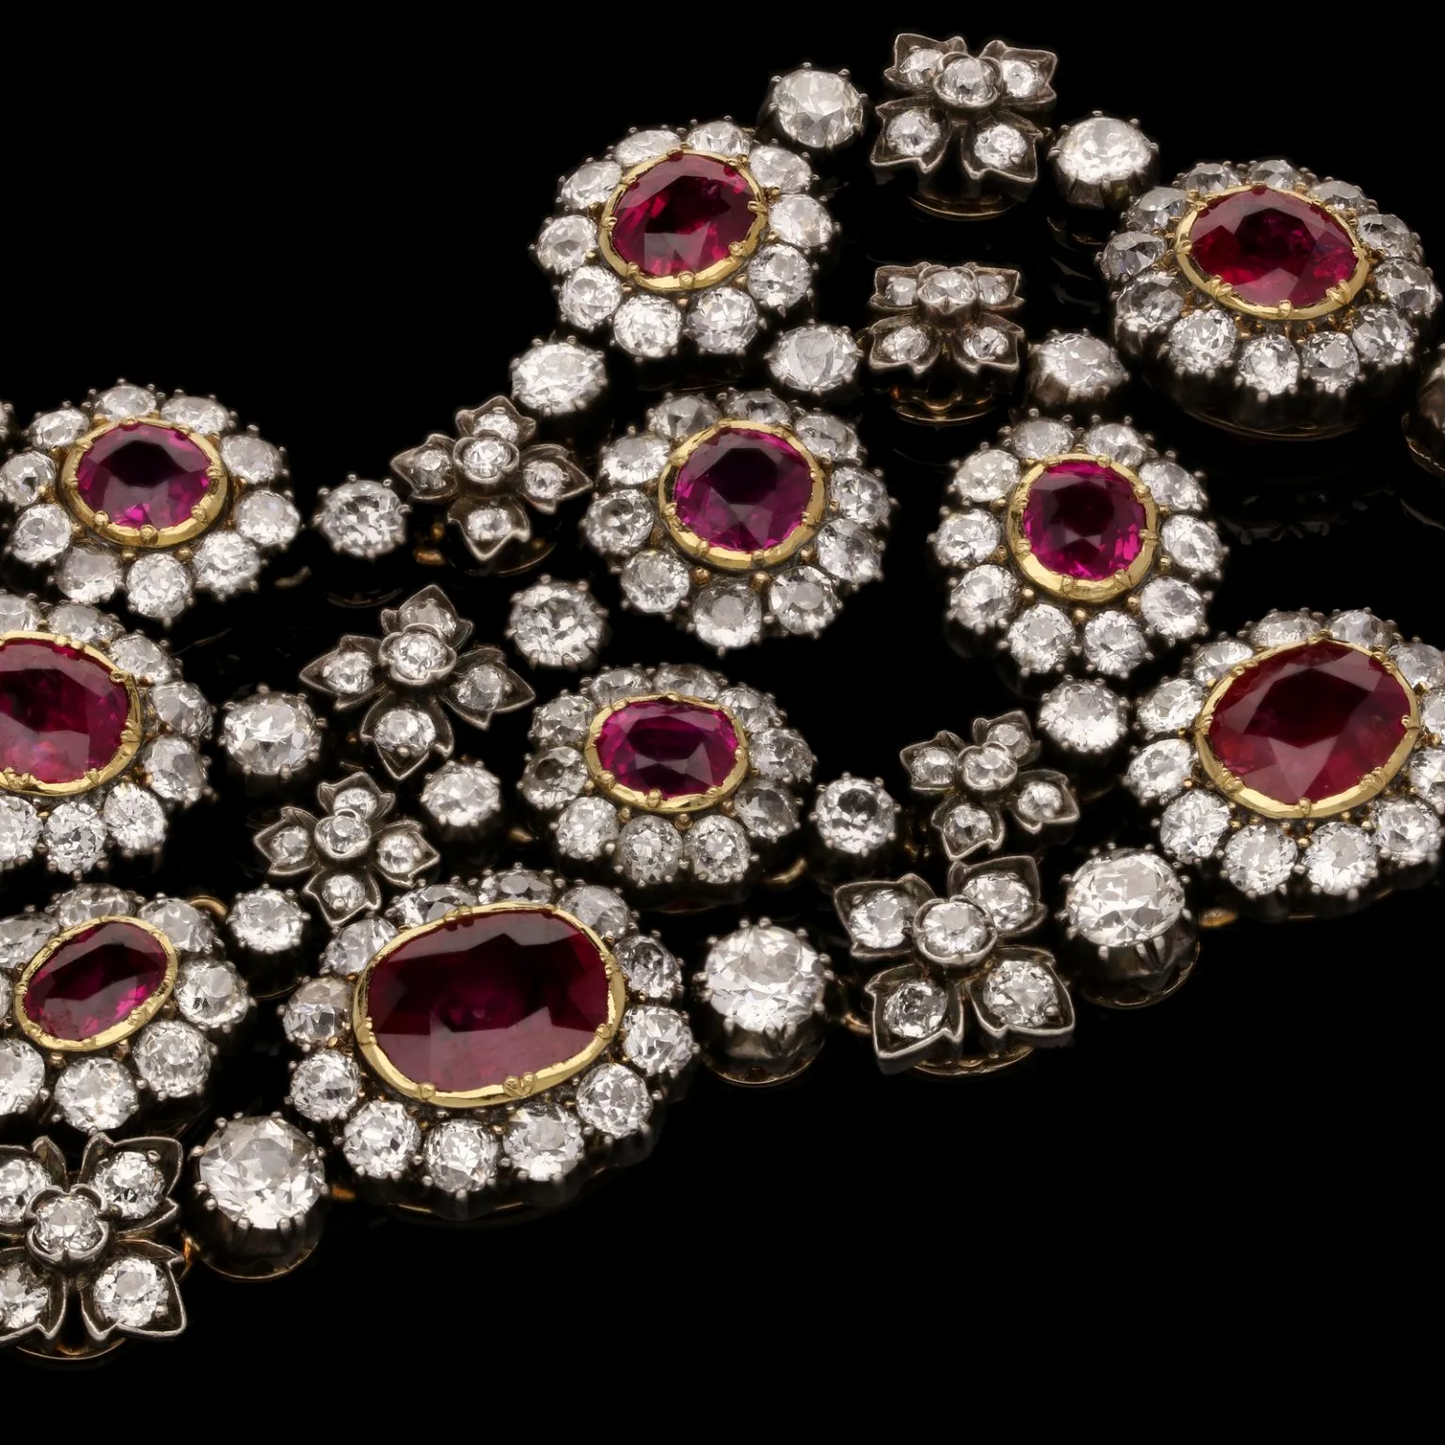  French Victorian 18KT Yellow Gold Ruby & Diamond Cluster Necklace close-up details